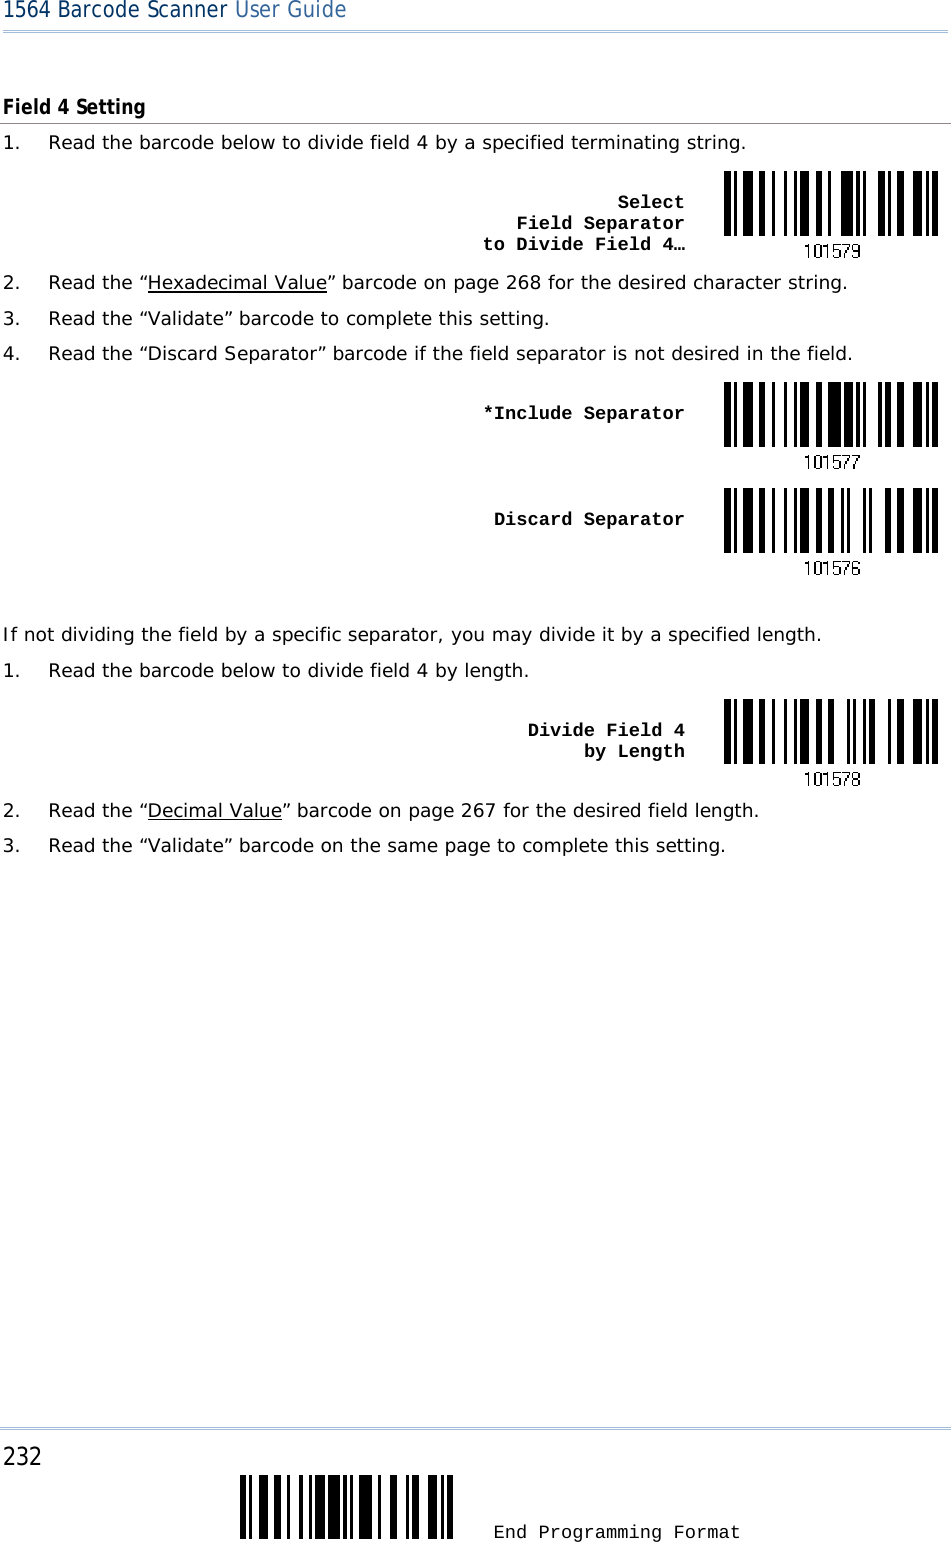 232  End Programming Format 1564 Barcode Scanner User Guide  Field 4 Setting 1.  Read the barcode below to divide field 4 by a specified terminating string.  Select  Field Separator  to Divide Field 4…2.  Read the “Hexadecimal Value” barcode on page 268 for the desired character string. 3.  Read the “Validate” barcode to complete this setting. 4.  Read the “Discard Separator” barcode if the field separator is not desired in the field.  *Include Separator Discard Separator If not dividing the field by a specific separator, you may divide it by a specified length. 1.  Read the barcode below to divide field 4 by length.  Divide Field 4  by Length2.  Read the “Decimal Value” barcode on page 267 for the desired field length. 3.  Read the “Validate” barcode on the same page to complete this setting.                    